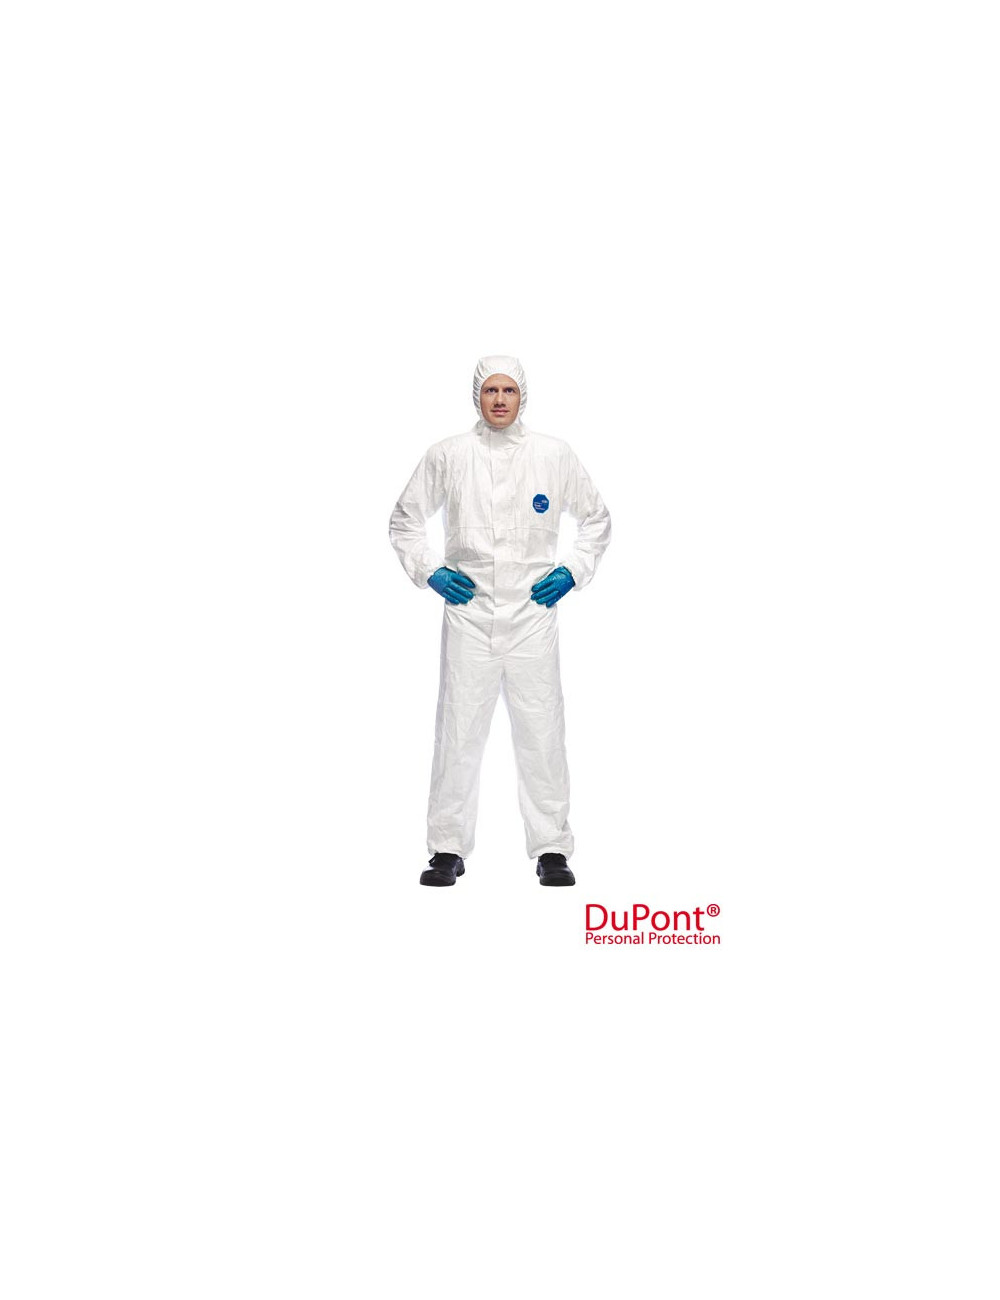 Tyvekx-chf5w protective suit in white Dupont